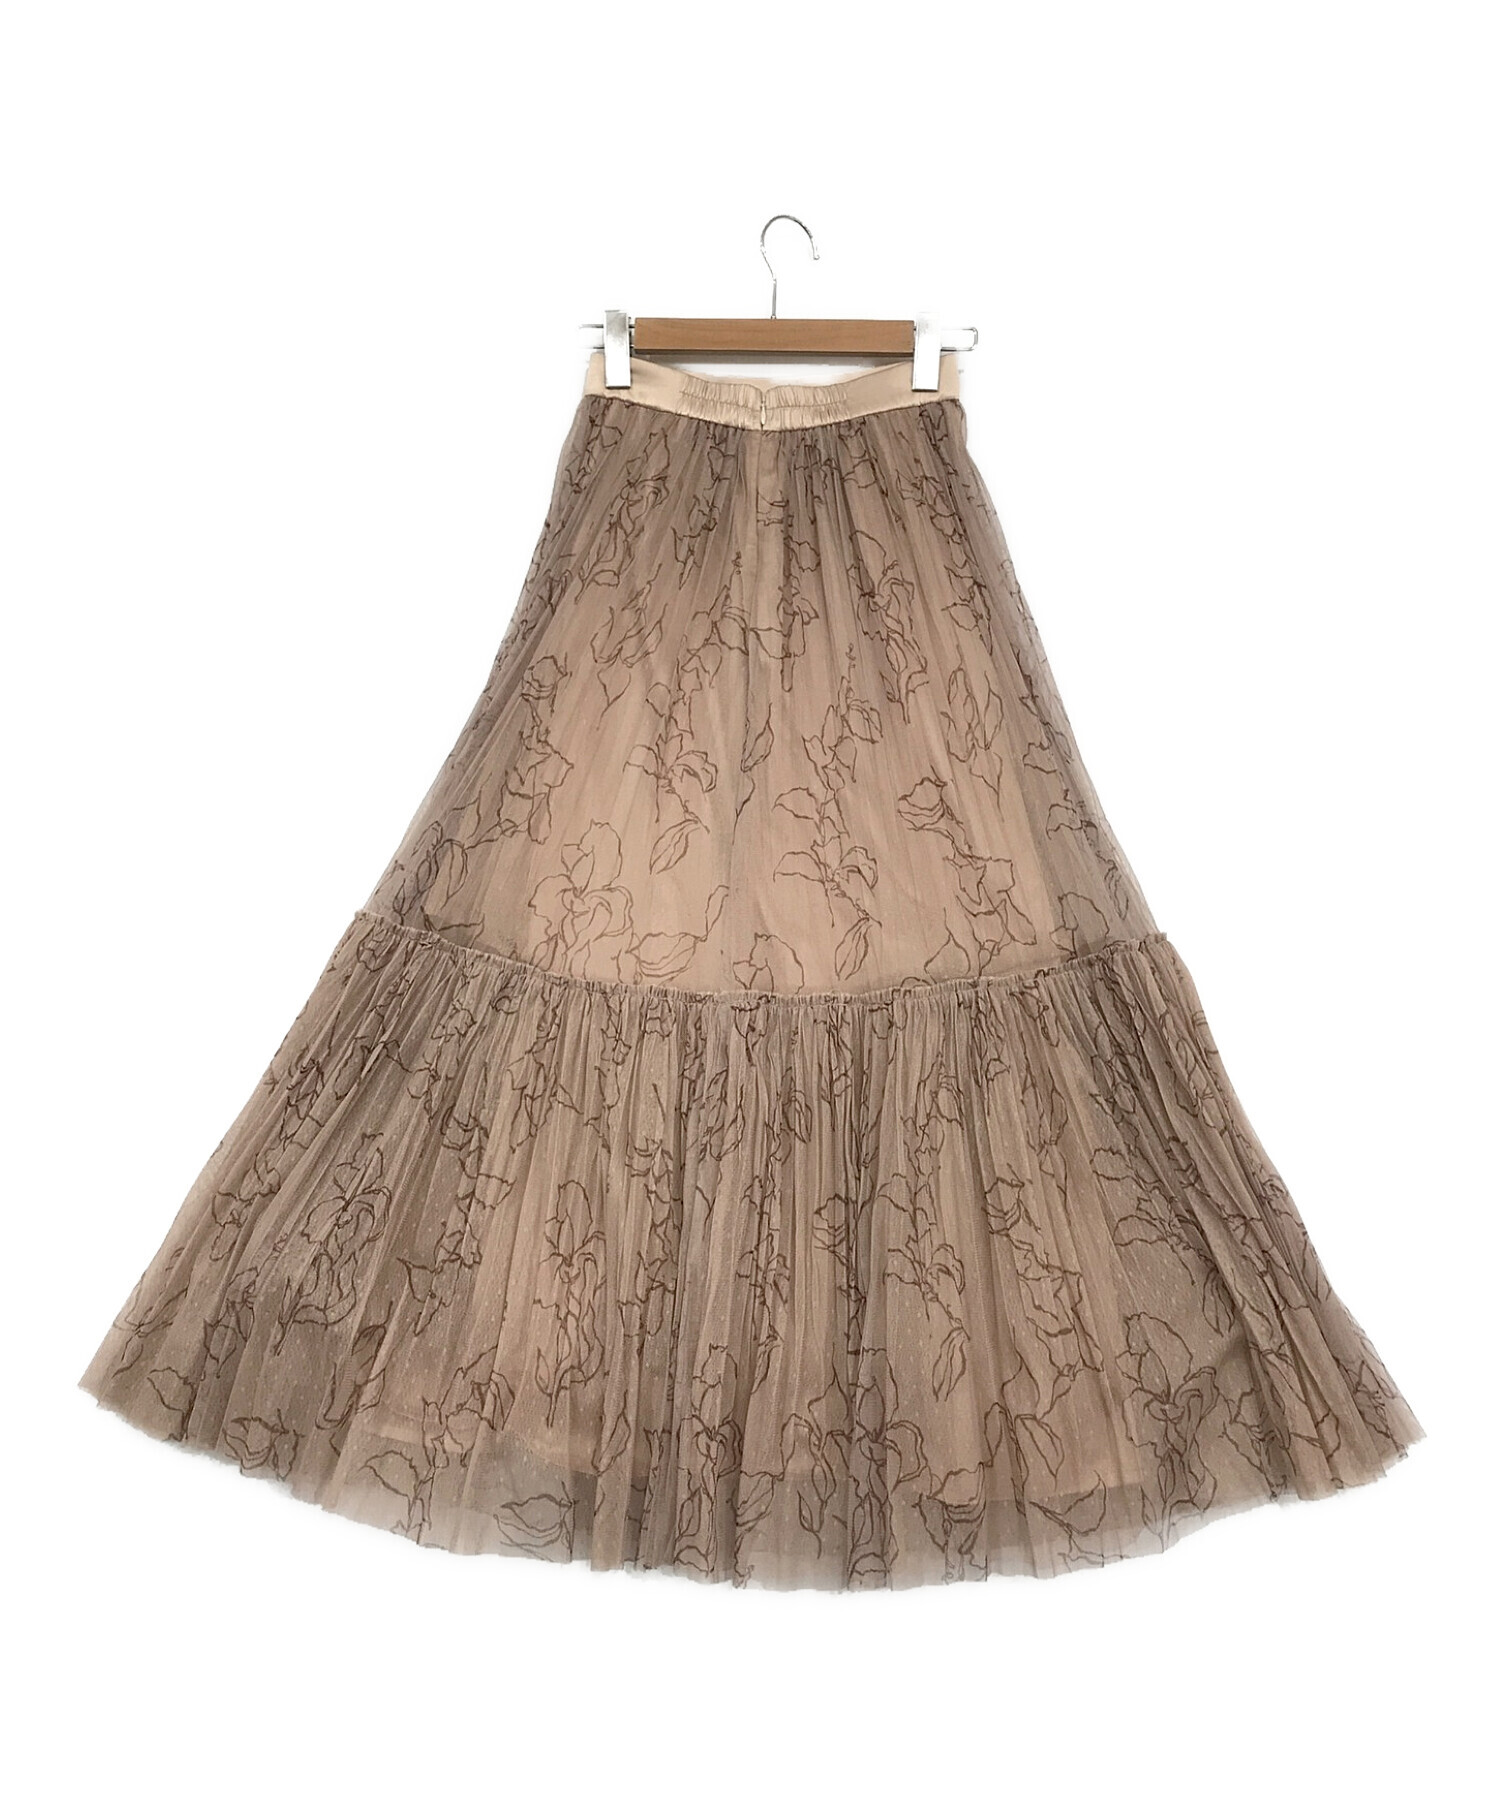 Her lip to Rose Pleated Tulle Skirt